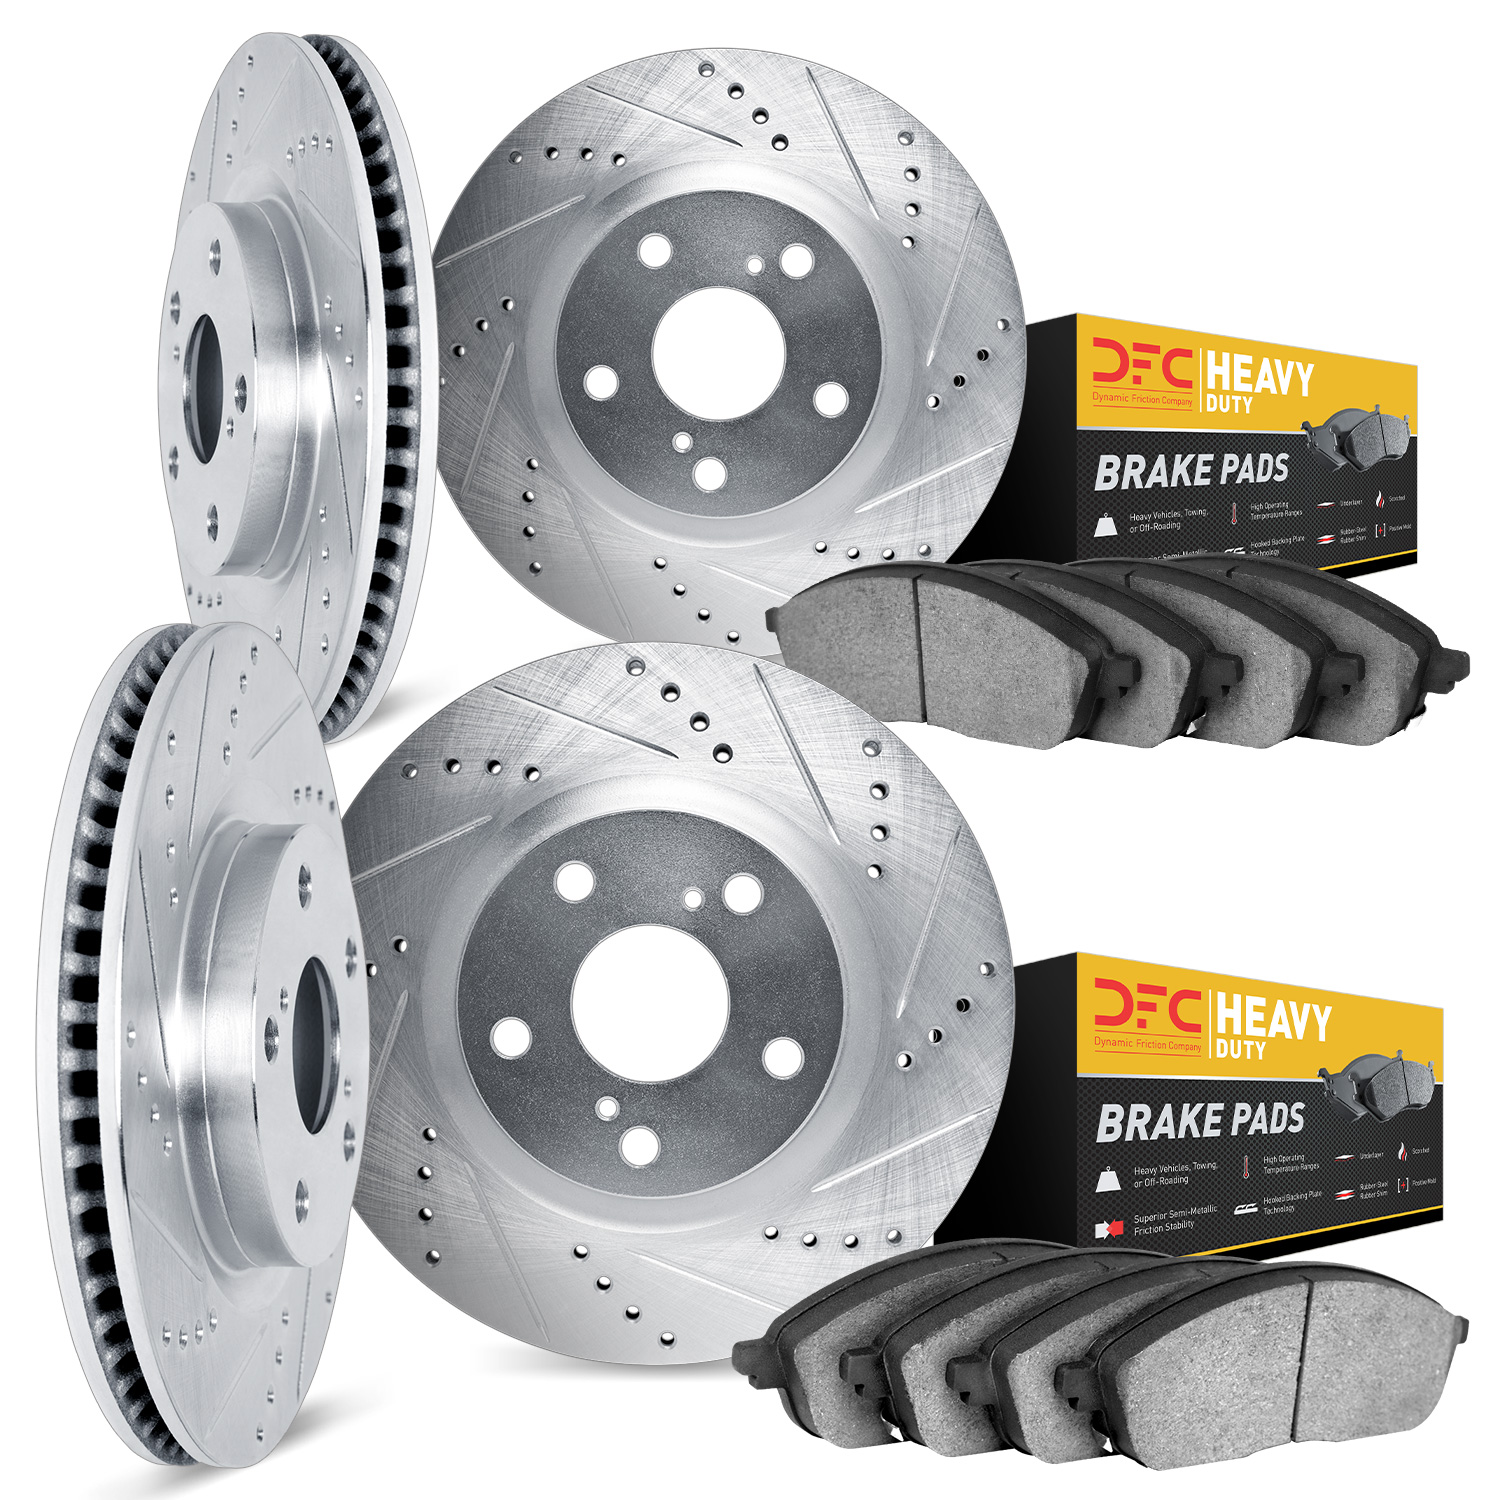 7204-40223 Drilled/Slotted Rotors w/Heavy-Duty Brake Pads Kit [Silver], 2003-2003 Mopar, Position: Front and Rear